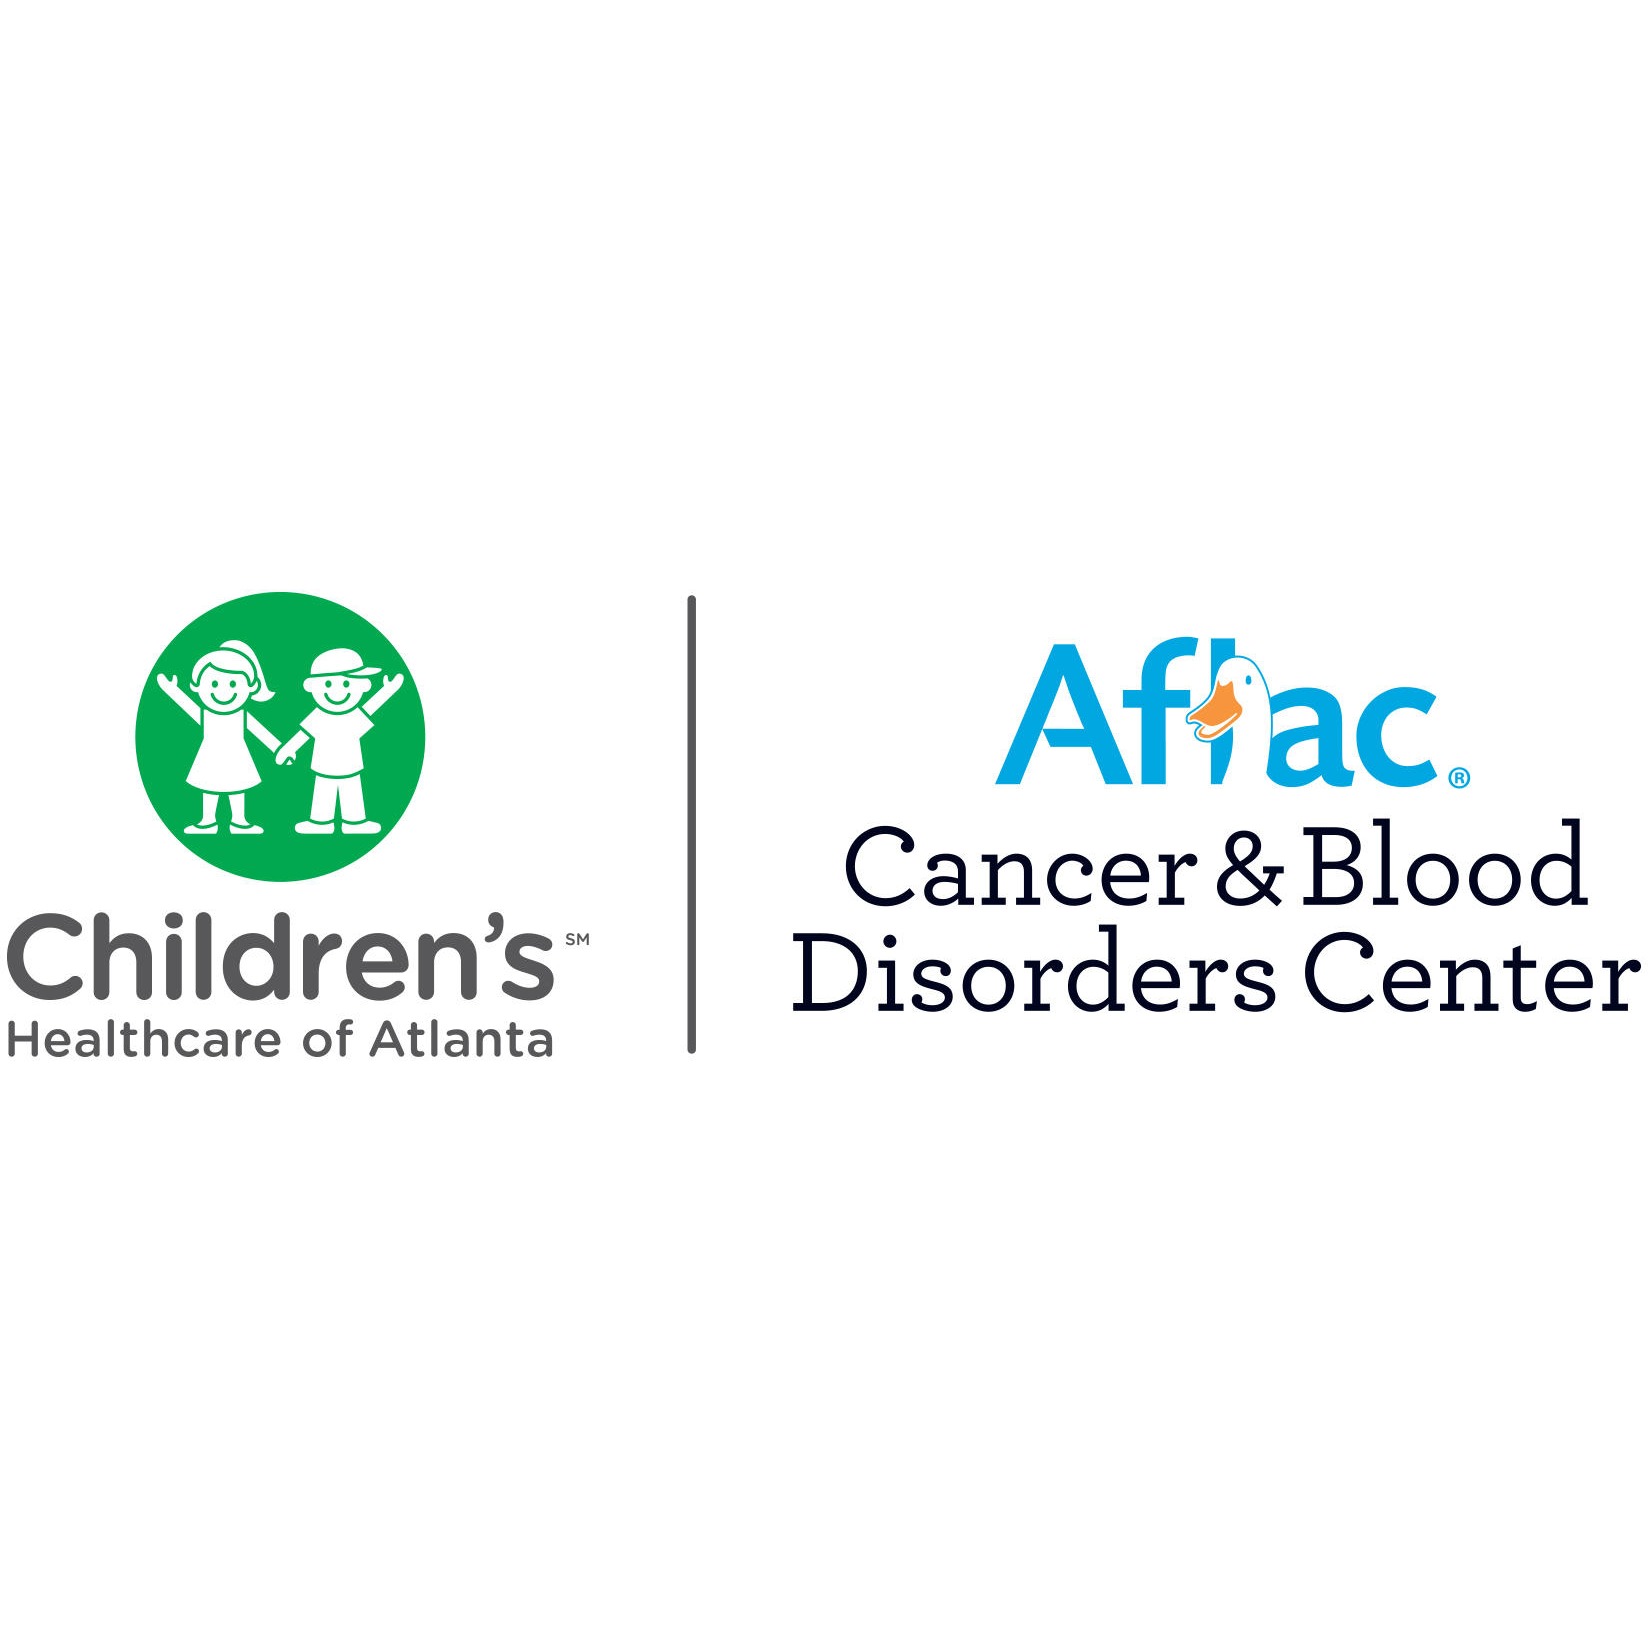 Aflac Cancer and Blood Disorders Center - Columbus